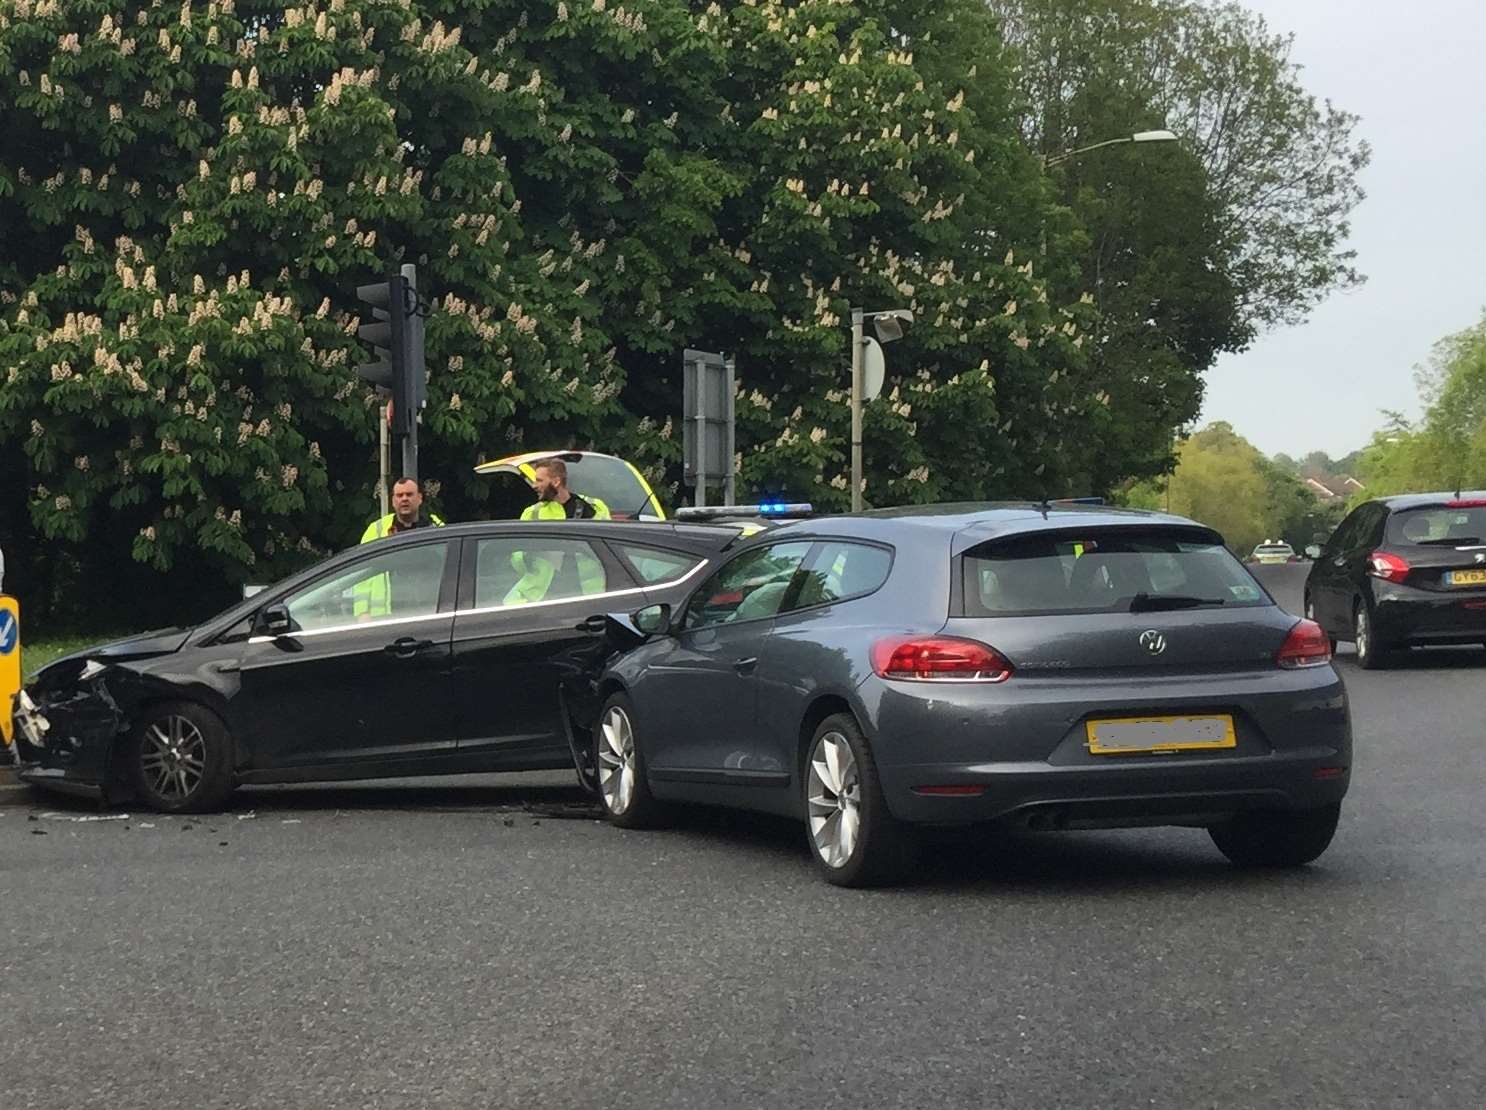 The two cars that collided at the junction of Canterbury Road and Simone Weil Avenue in Ashford